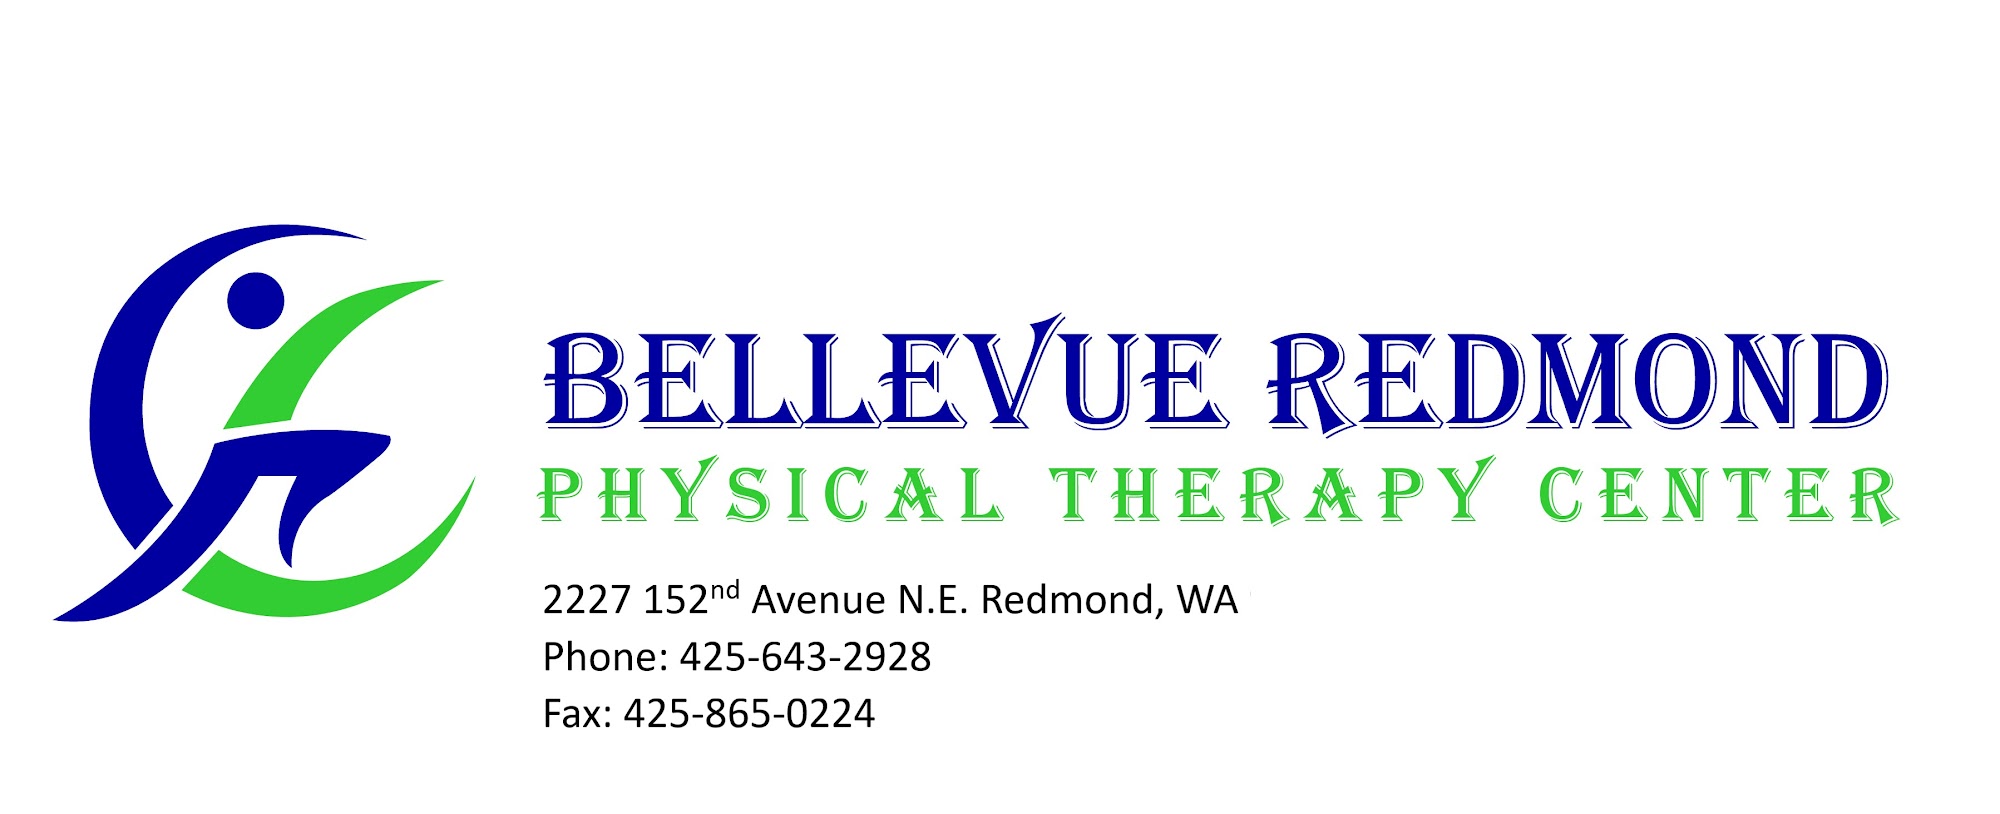 Bellevue Redmond Physical Therapy Center